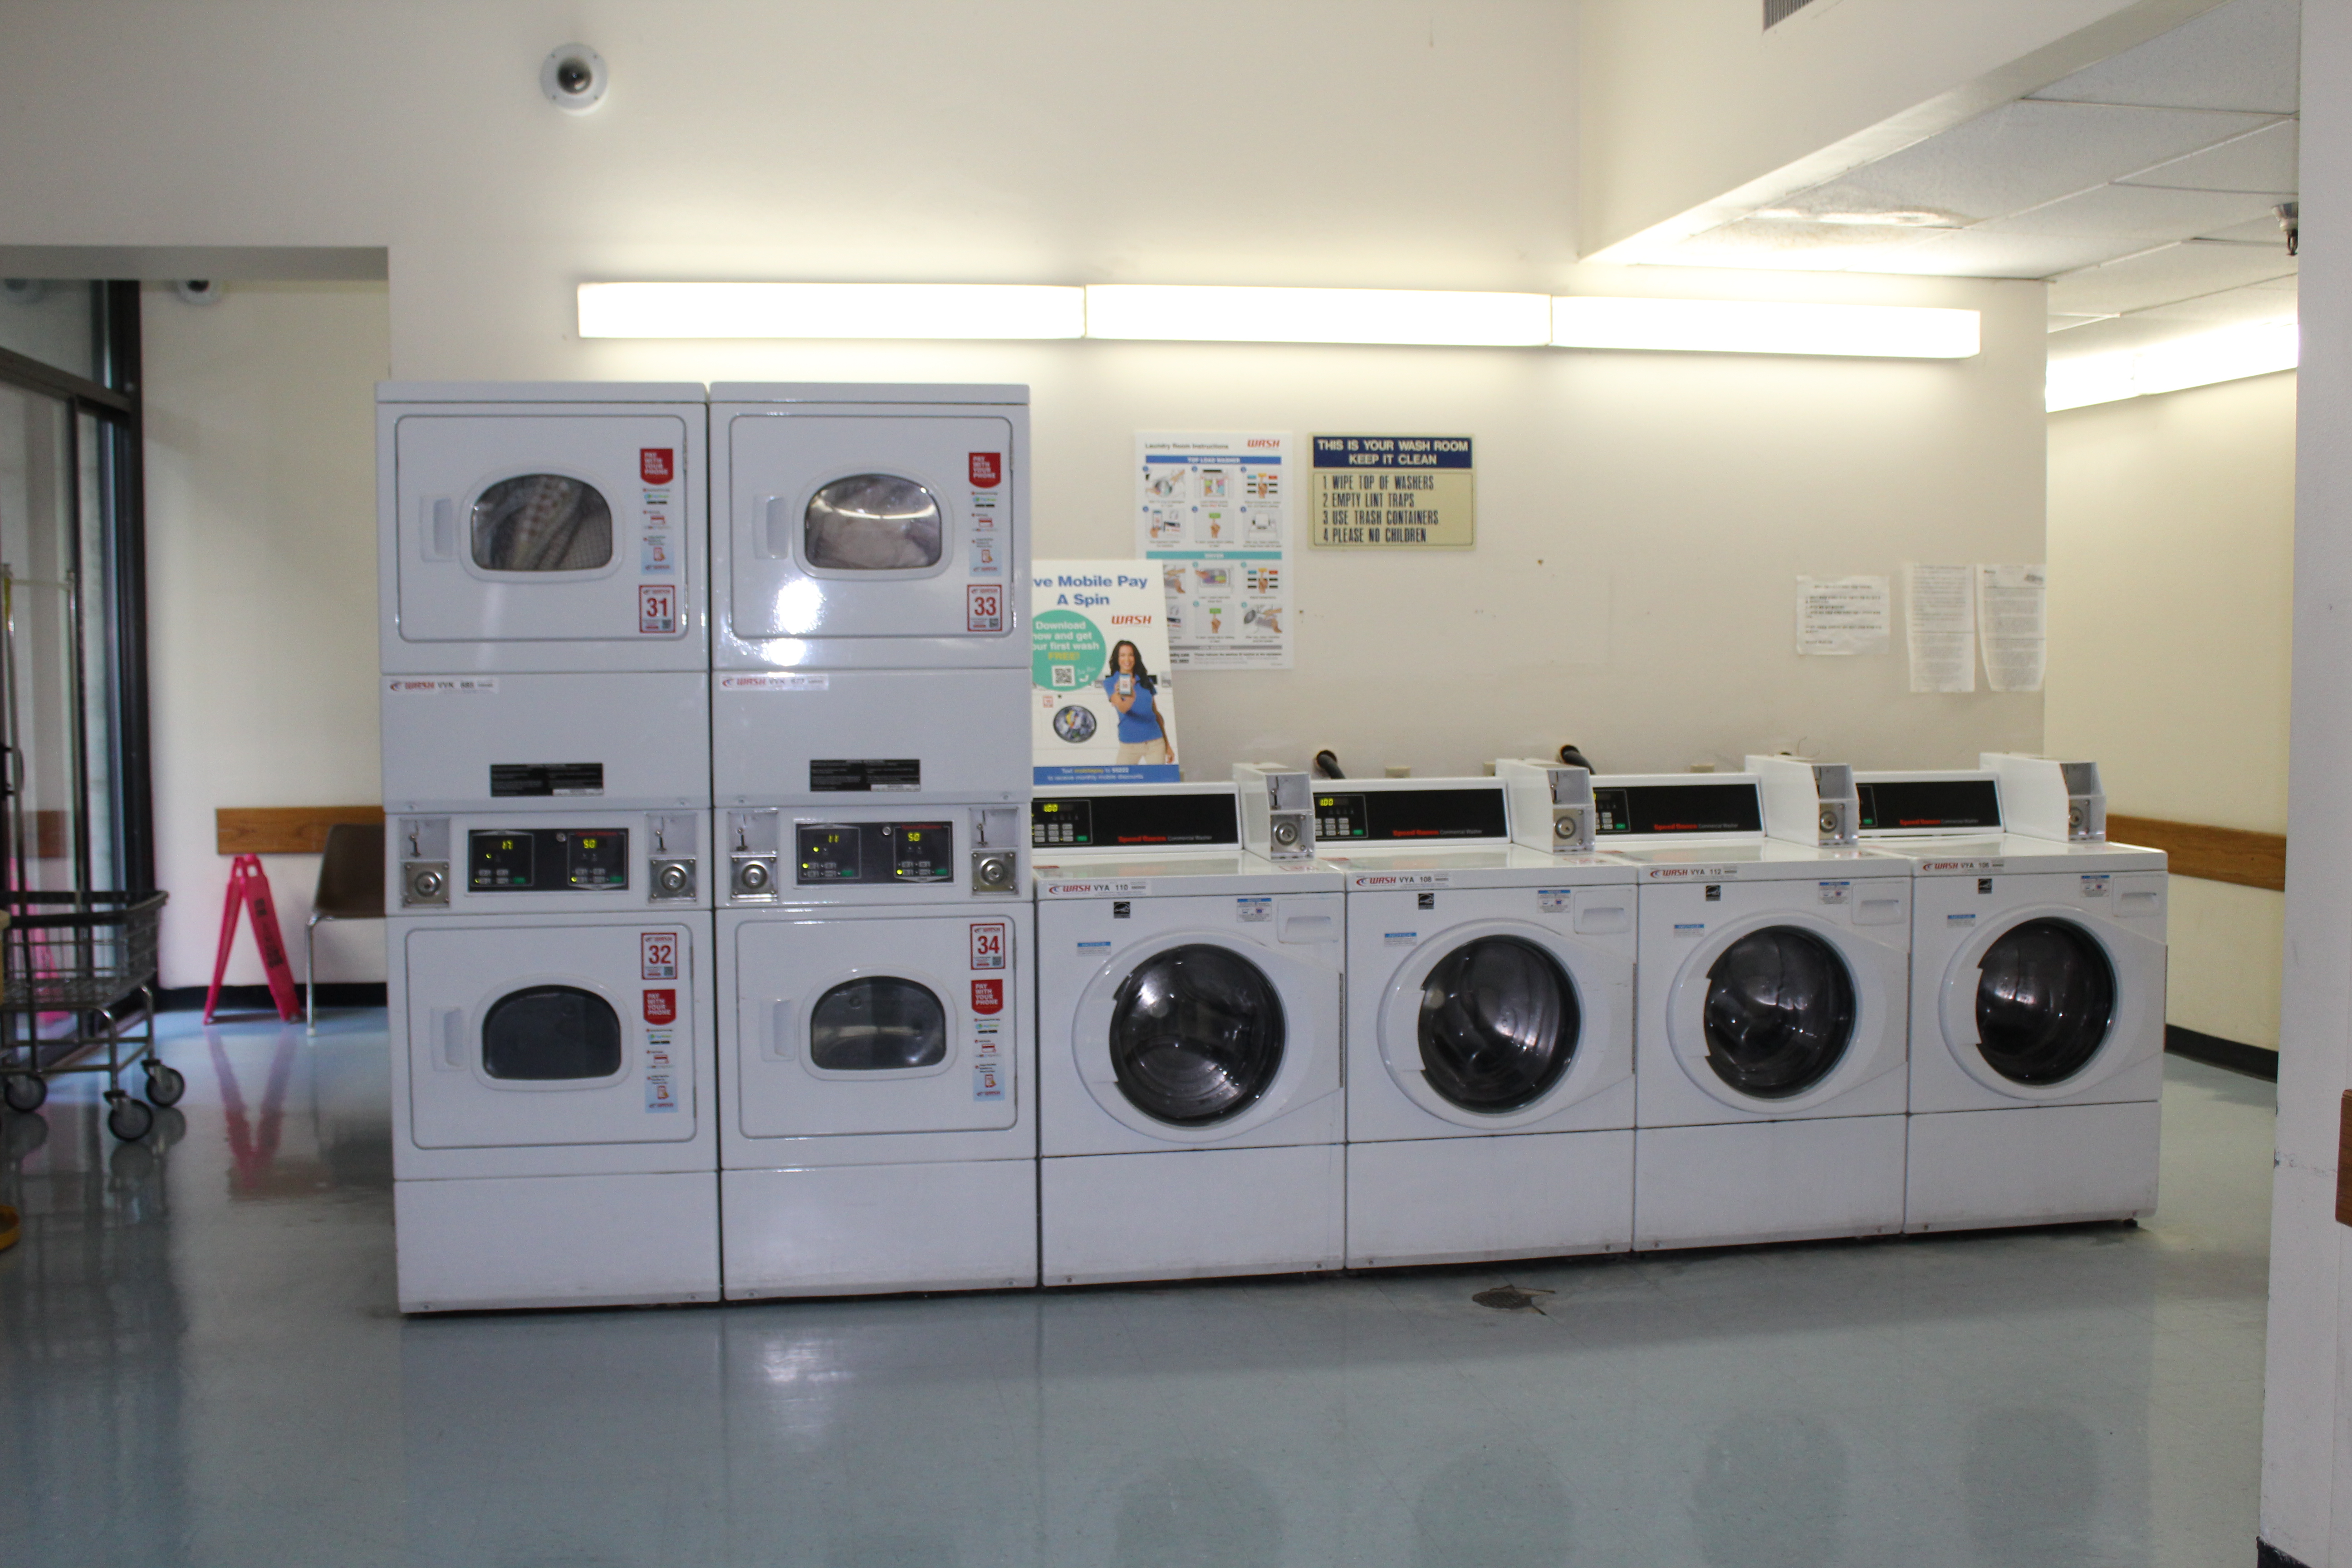 Interior view of a laundry room for Angelus Plaza 1. 4 white washers with front circular windowed doors. Two rows of white dryers, 4 total